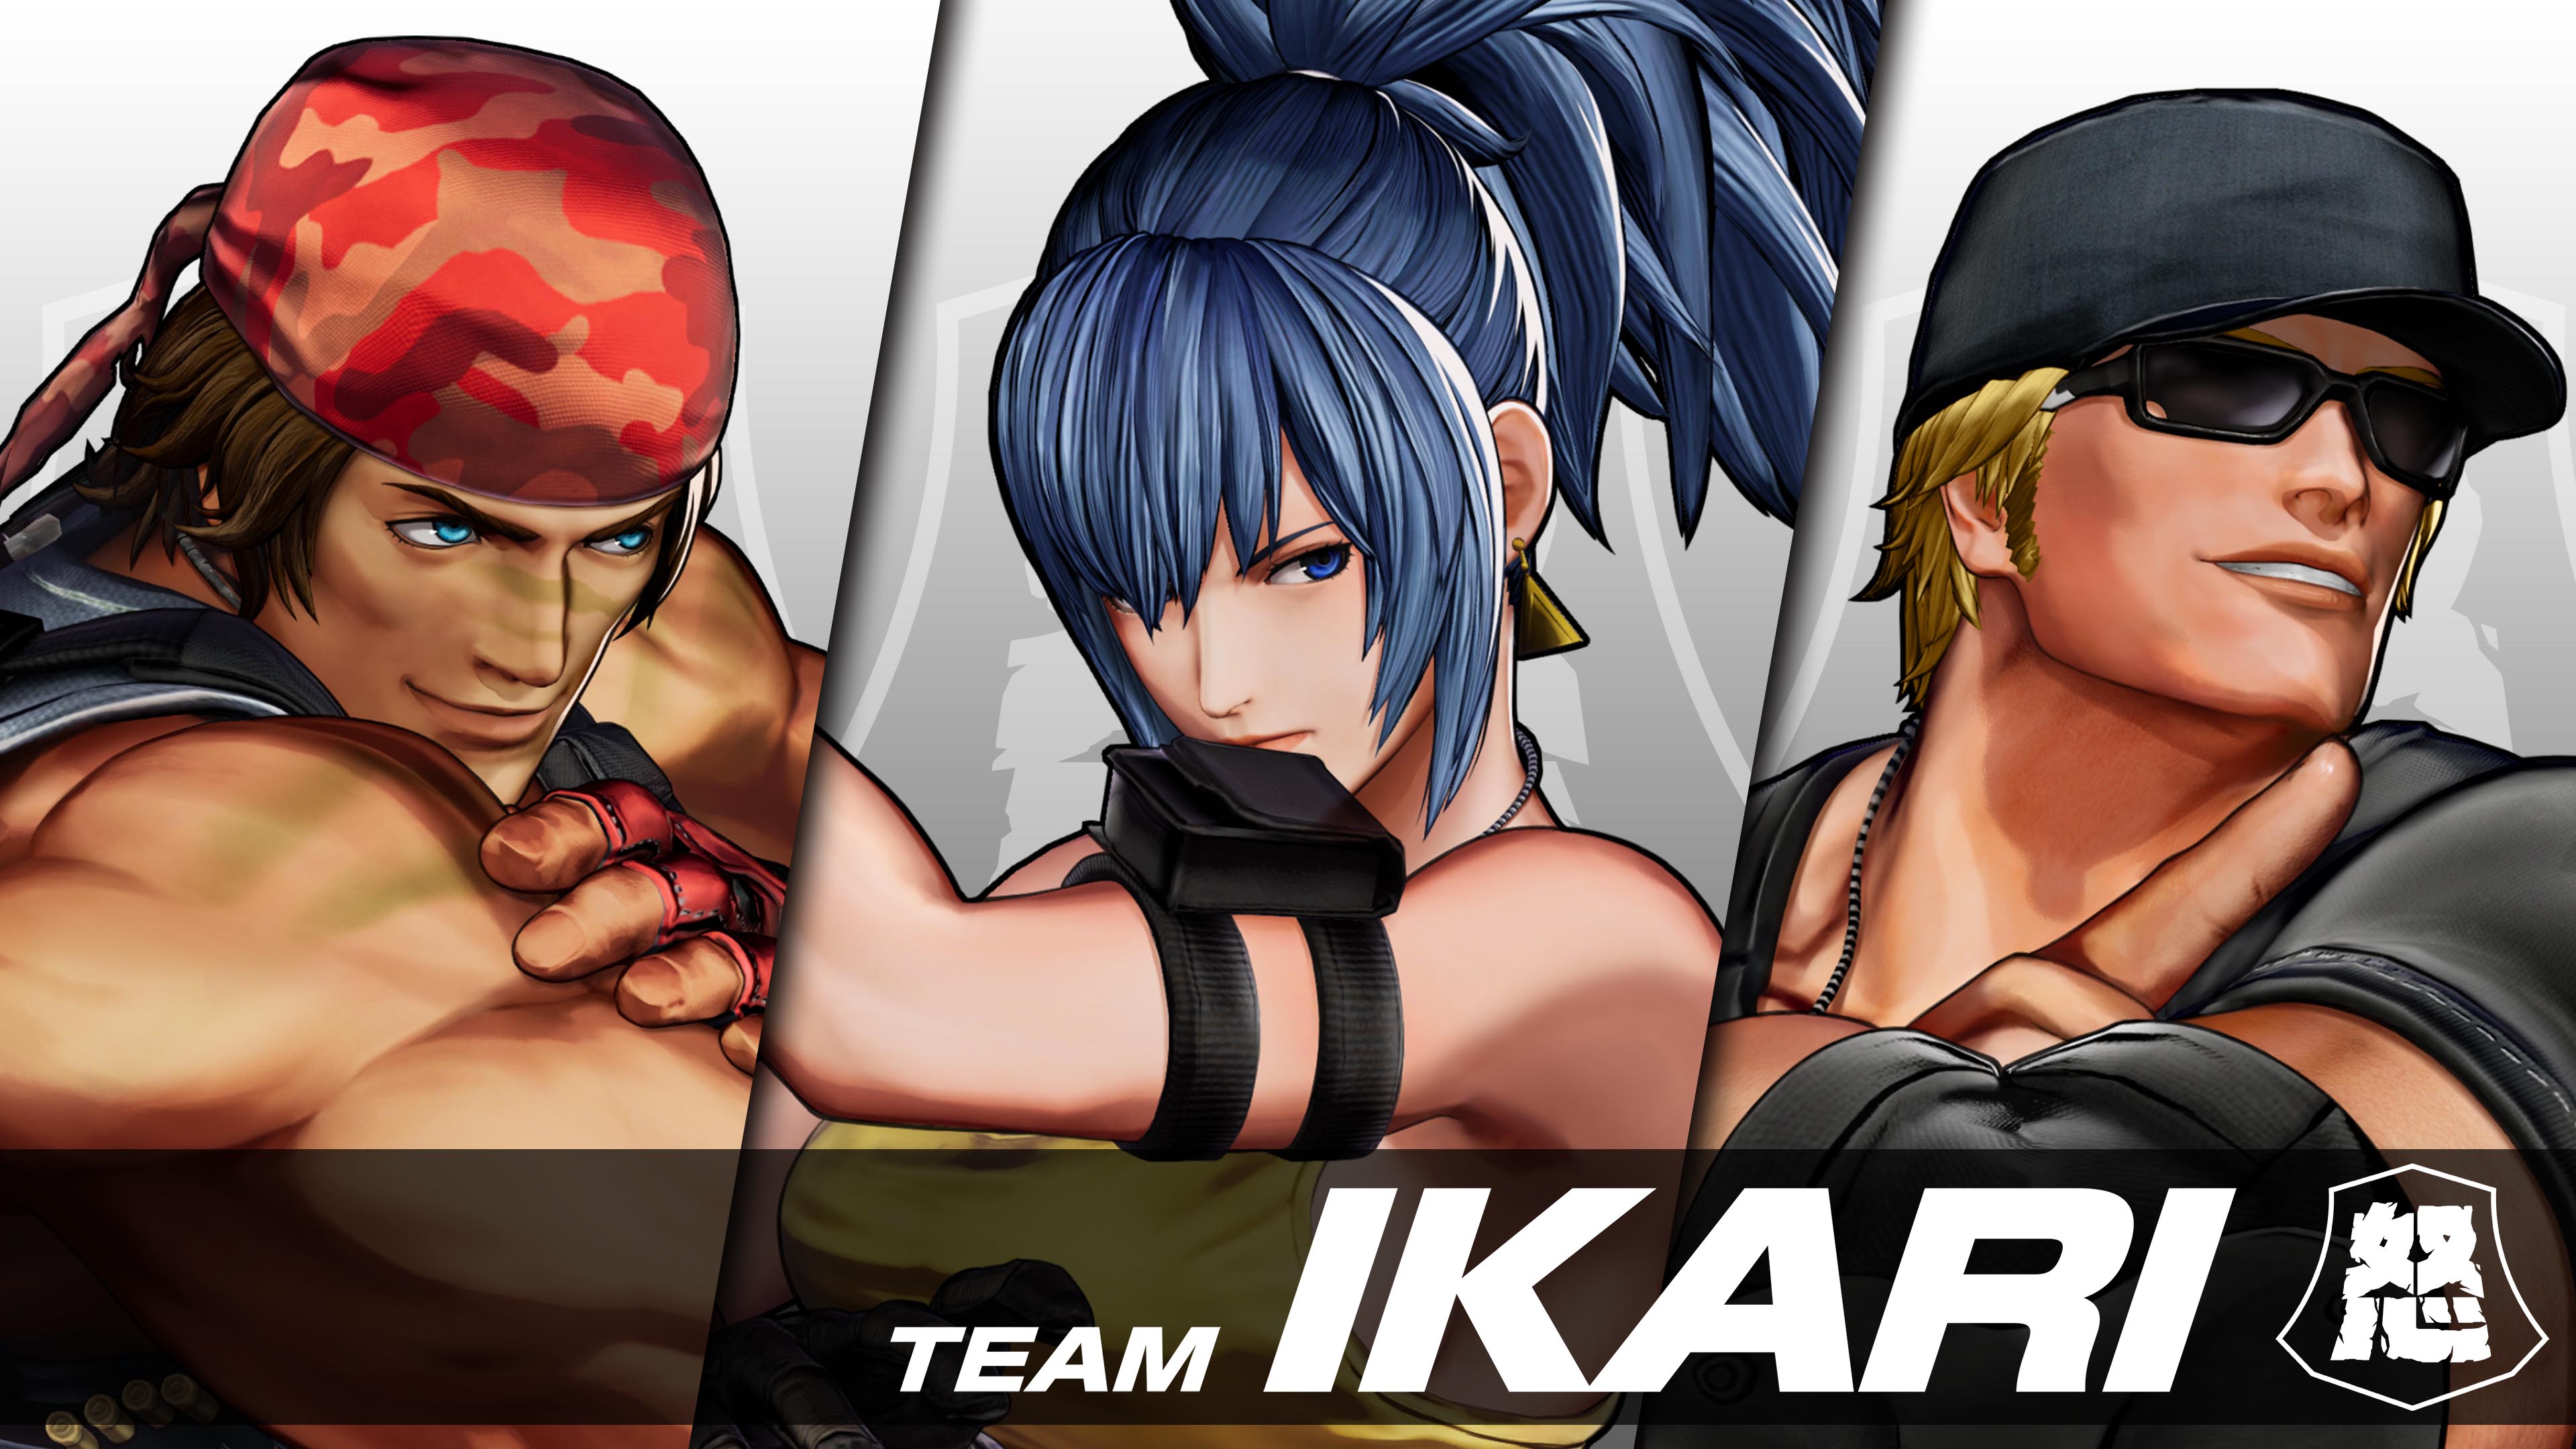 Ralf Jones - King of Fighters - Character notes and DC Heroes